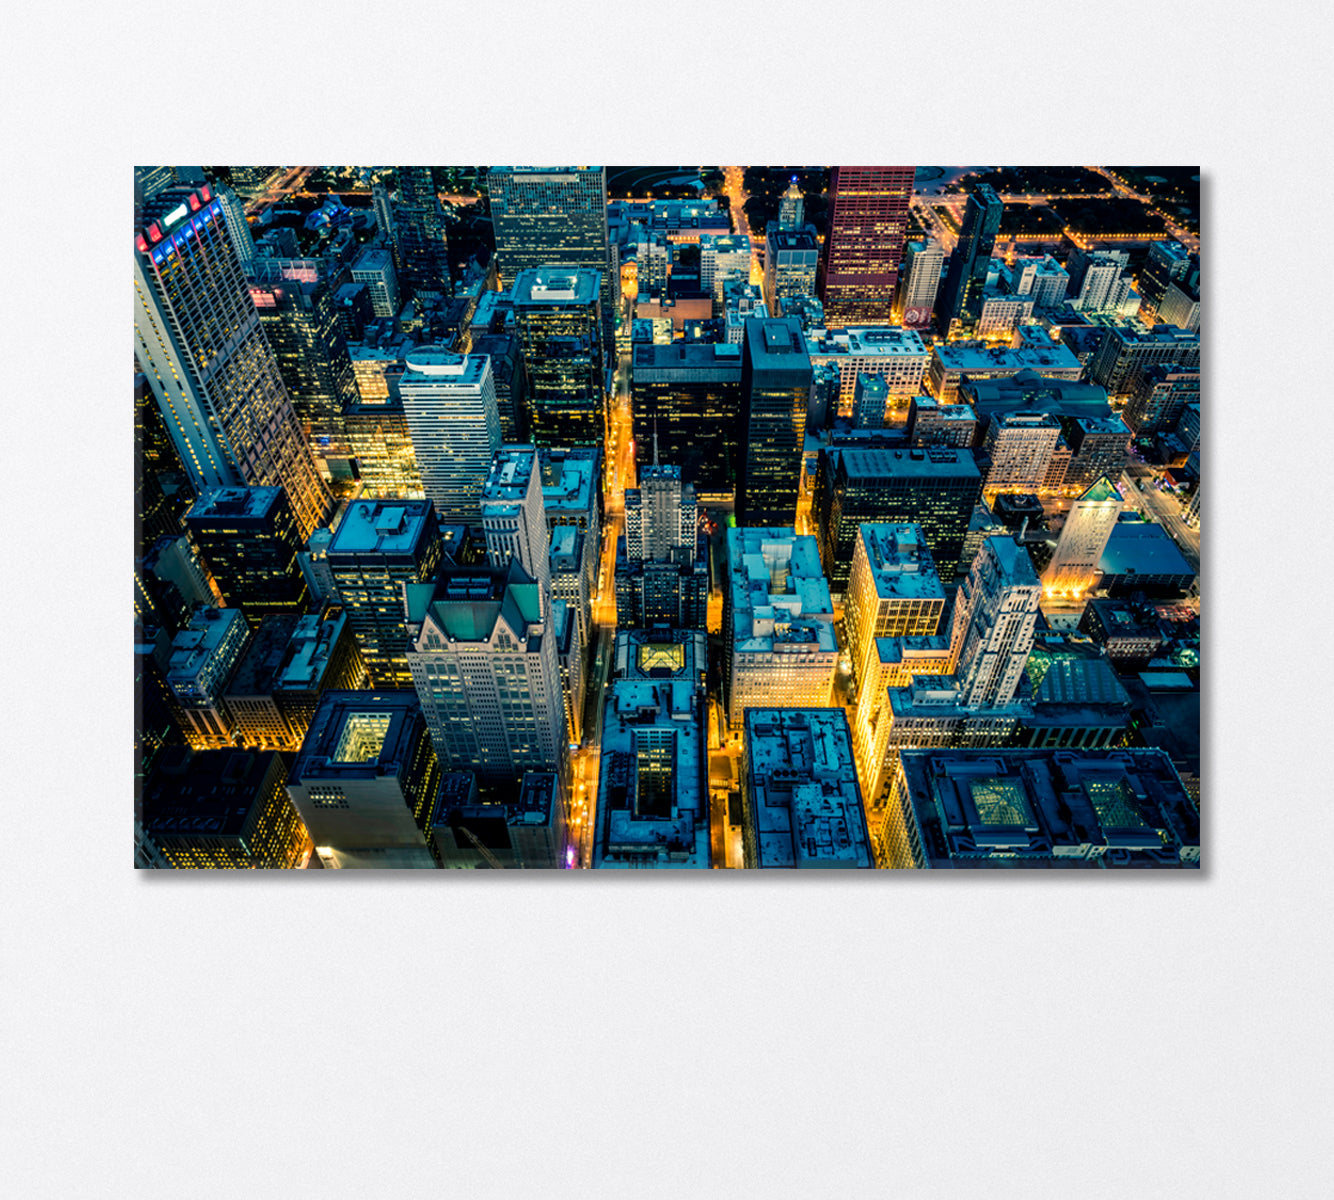 Aerial View of Chicago at Night Canvas Print-Canvas Print-CetArt-1 Panel-24x16 inches-CetArt